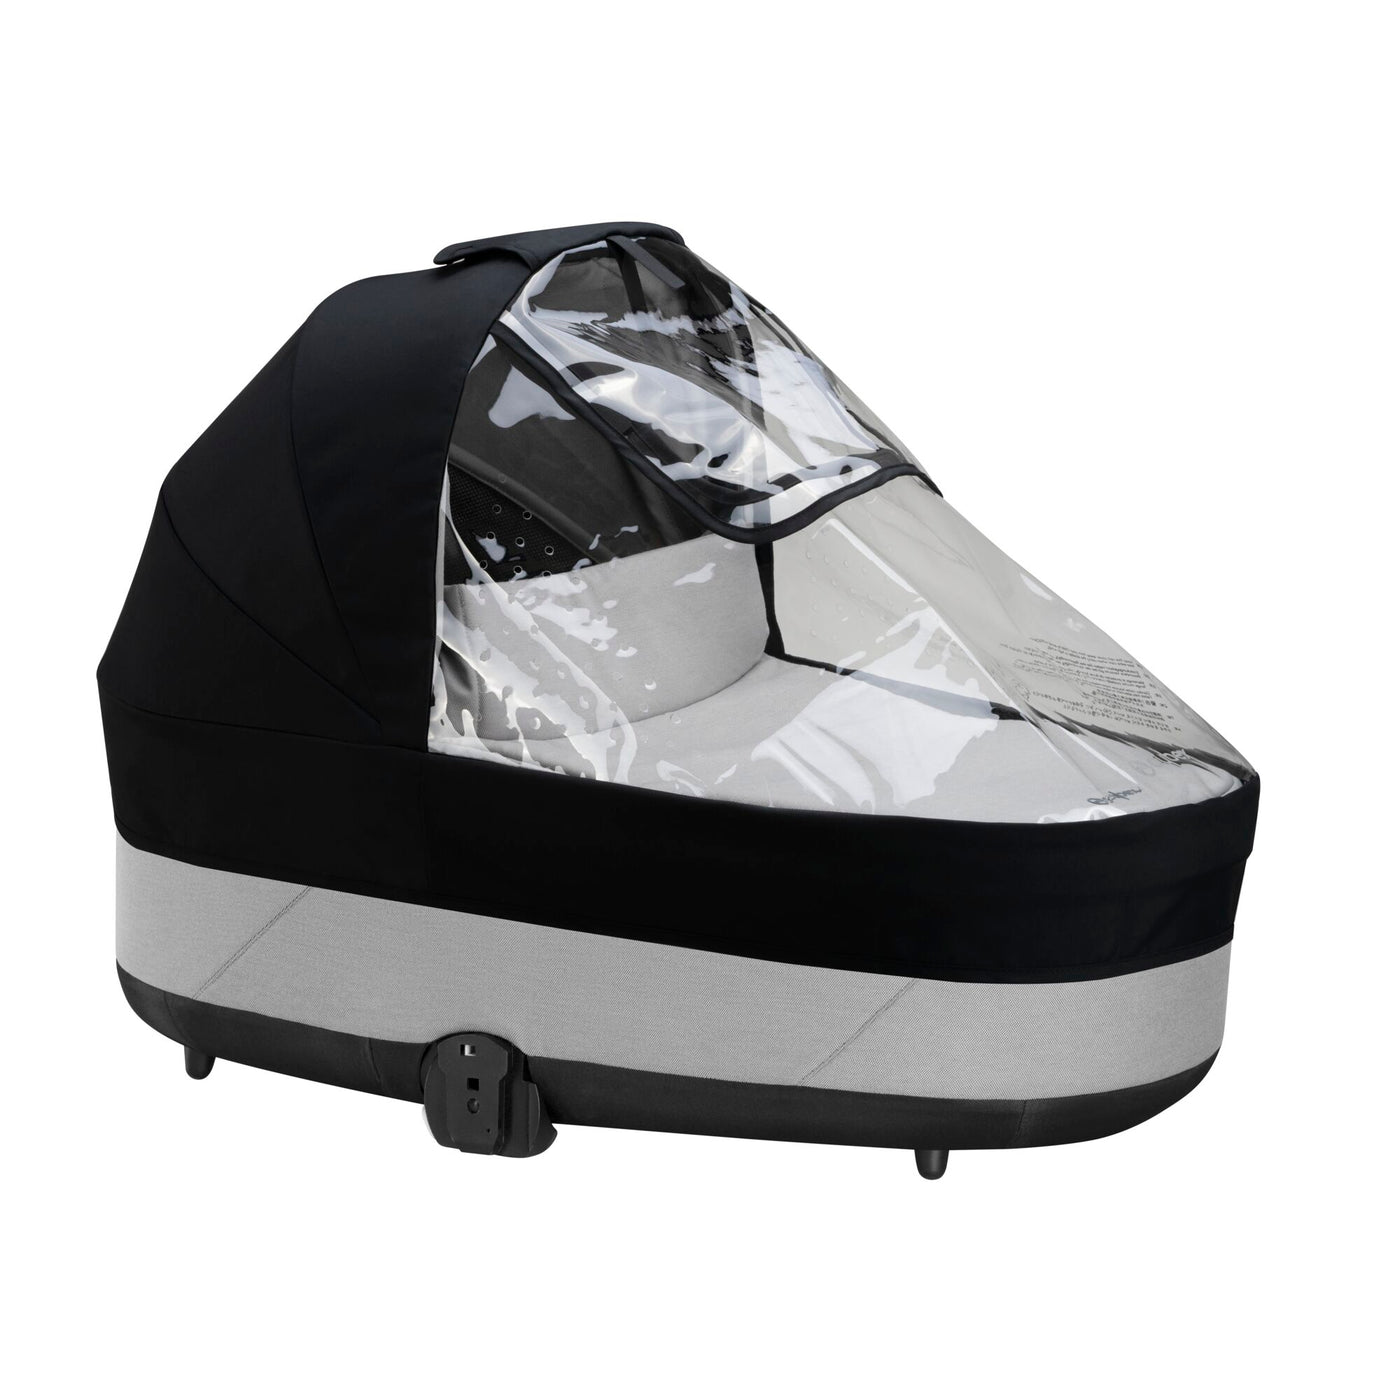 Cybex Cot S Lux Carrycot- Lava Grey